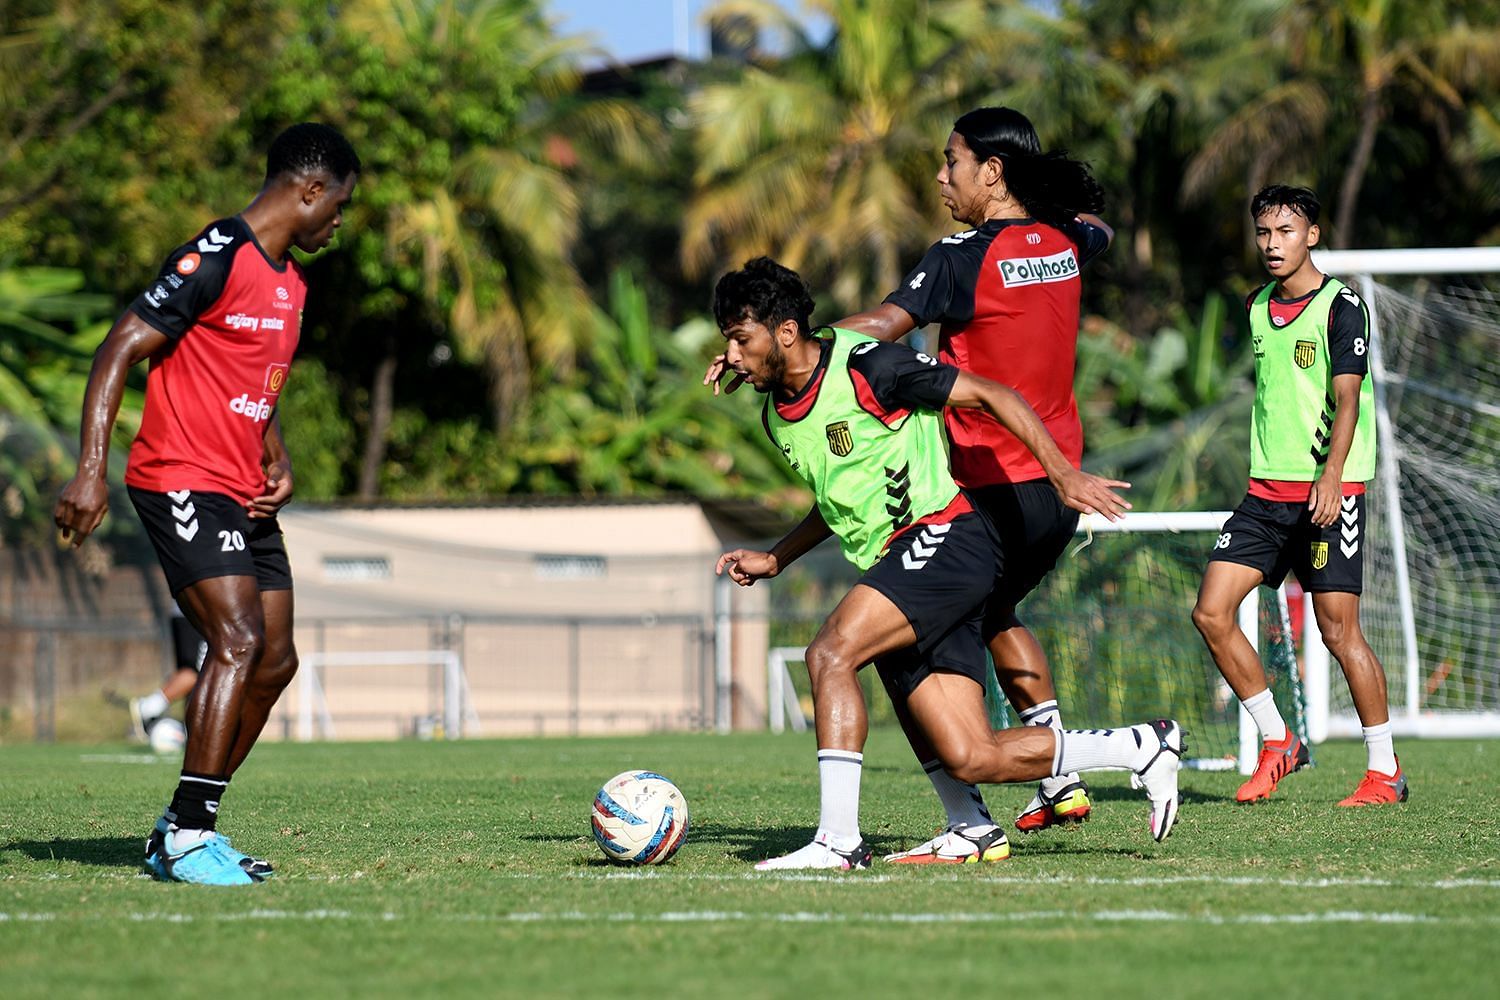 Hyderabad FC players training ahead of their clash against ATK Mohun Bagan. (Image Courtesy: Twitter/HydFCOfficial)